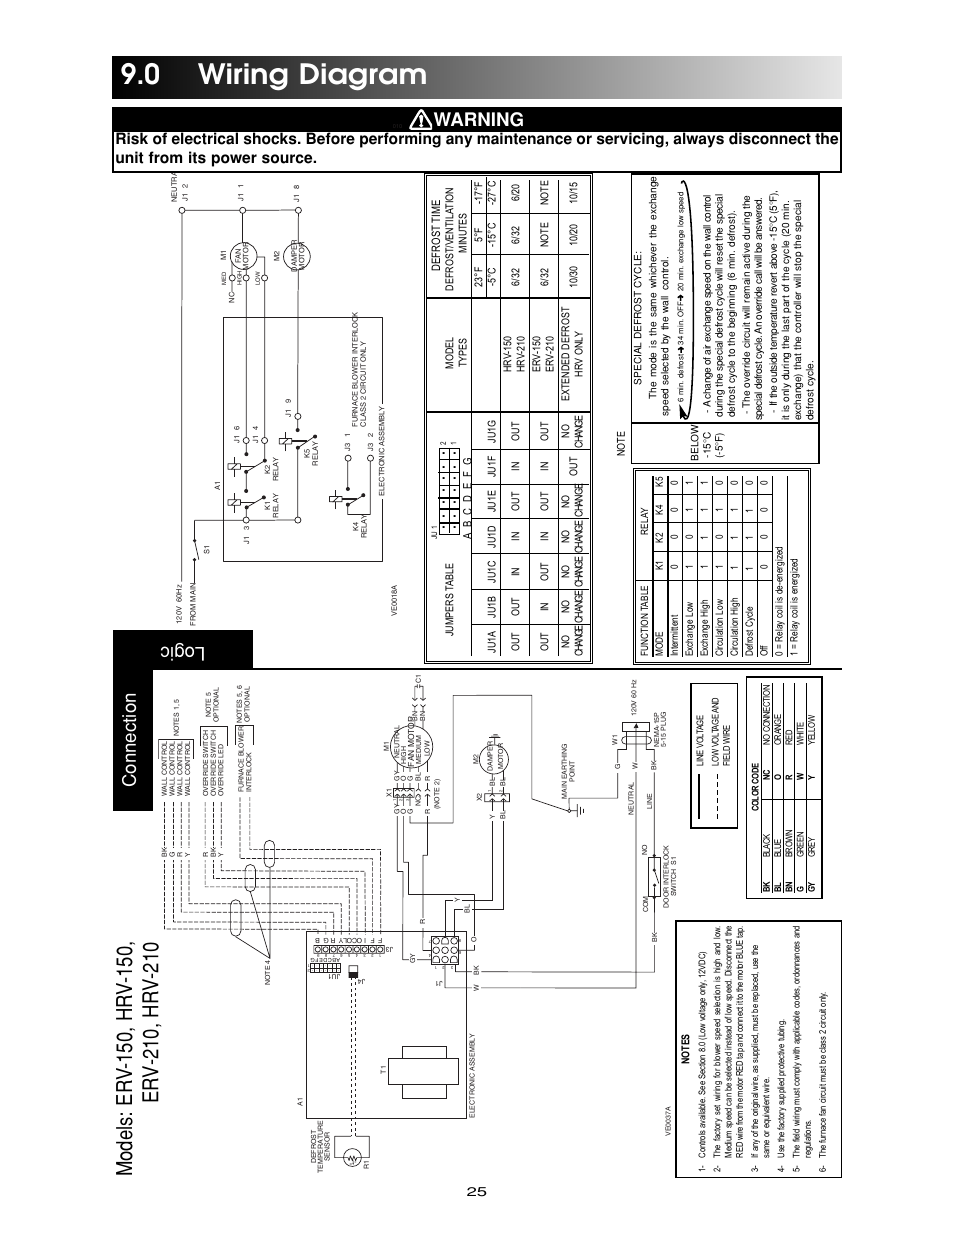 0 wiring diagram, Connection logic, Warning | Maytag Ventilation Systems HRV-210 User Manual | Page 25 / 32